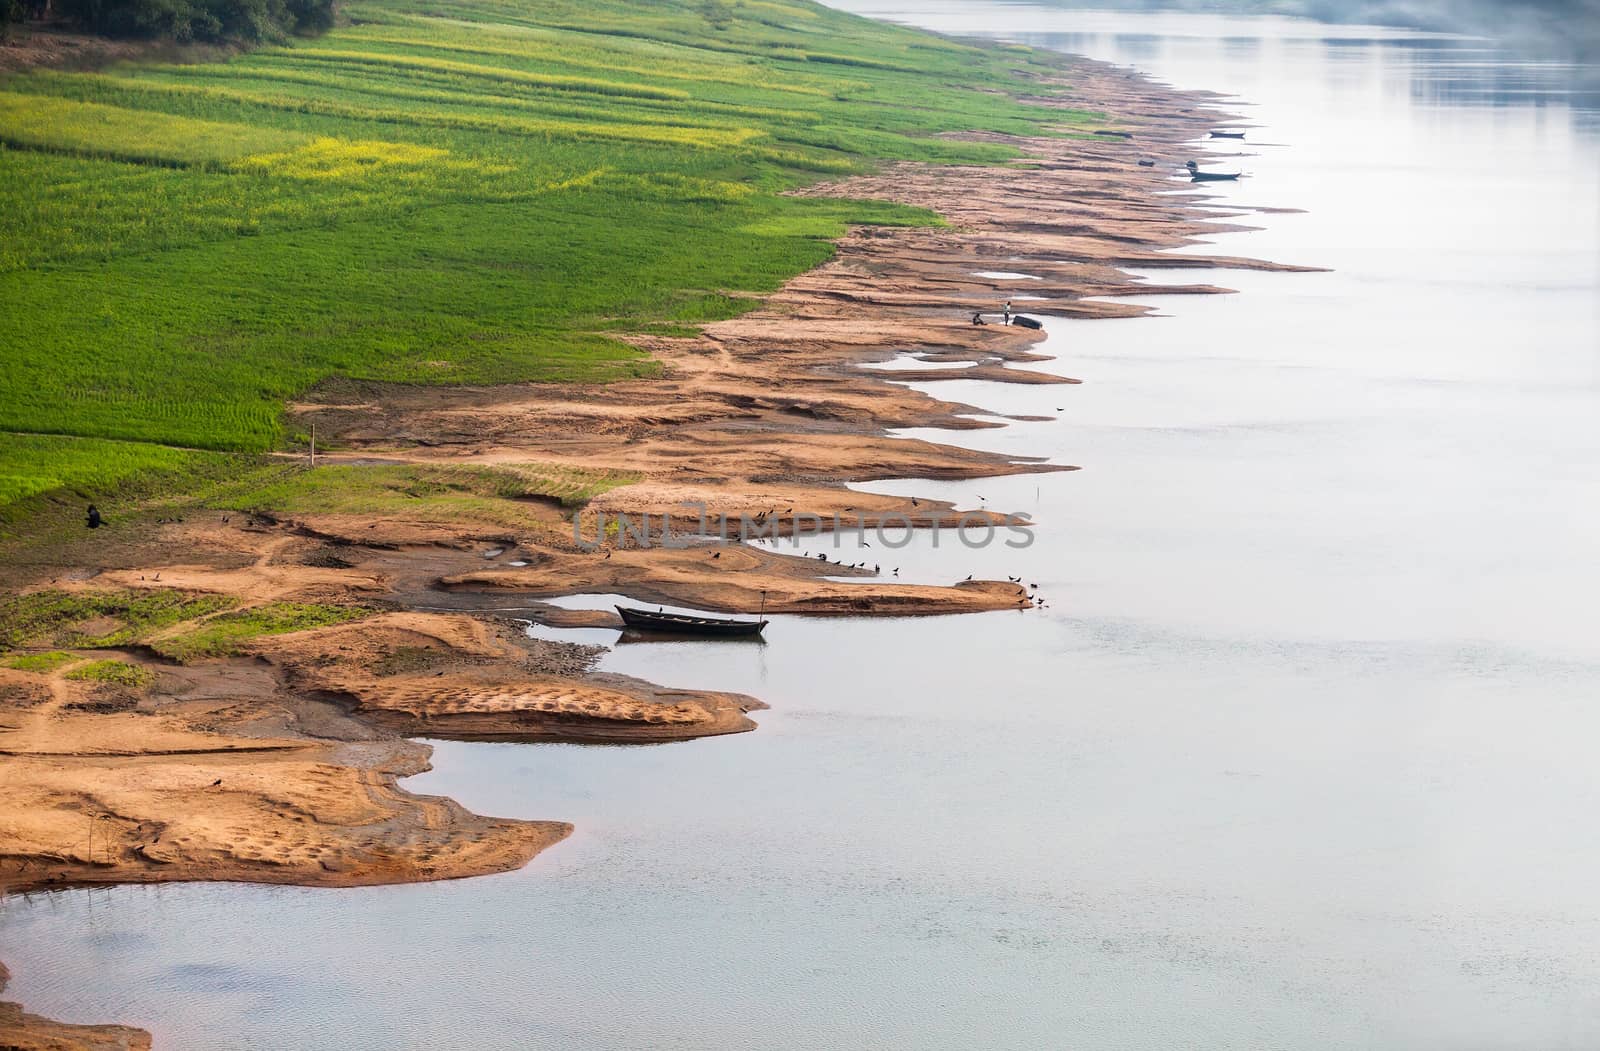 Coastline erosion on the Ganges River. Crops of agricultures in the delta of the river are penetrated by net of gullies. Destruction of the coast is caused by tropical rains. Birds have chosen river shallows and fishing boats.